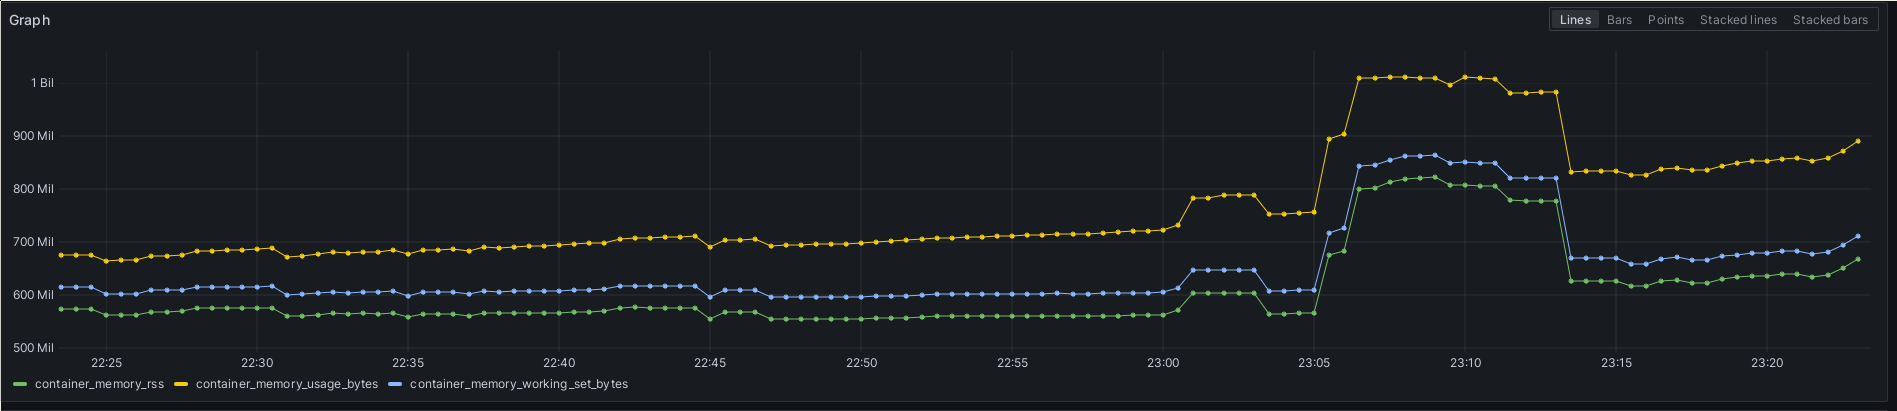 Another Grafana screenshot, this time of a single panel with three curves, showing different memory metrics. All three curves follow roughly the same behavior. Initially, all three show a slow increase, until they shortly raise up, then go down, just to then raise up even higher, before going down again, all in unison and by approximately the same value. The lowest of the three, titled 'container_memory_rss', starts at around 570 MB. The middle curve, showing 'container_memory_working_set_bytes', starts at about 600 MB, while the highest of the three, 'container_memory_usage_bytes', starts at 680 MB.